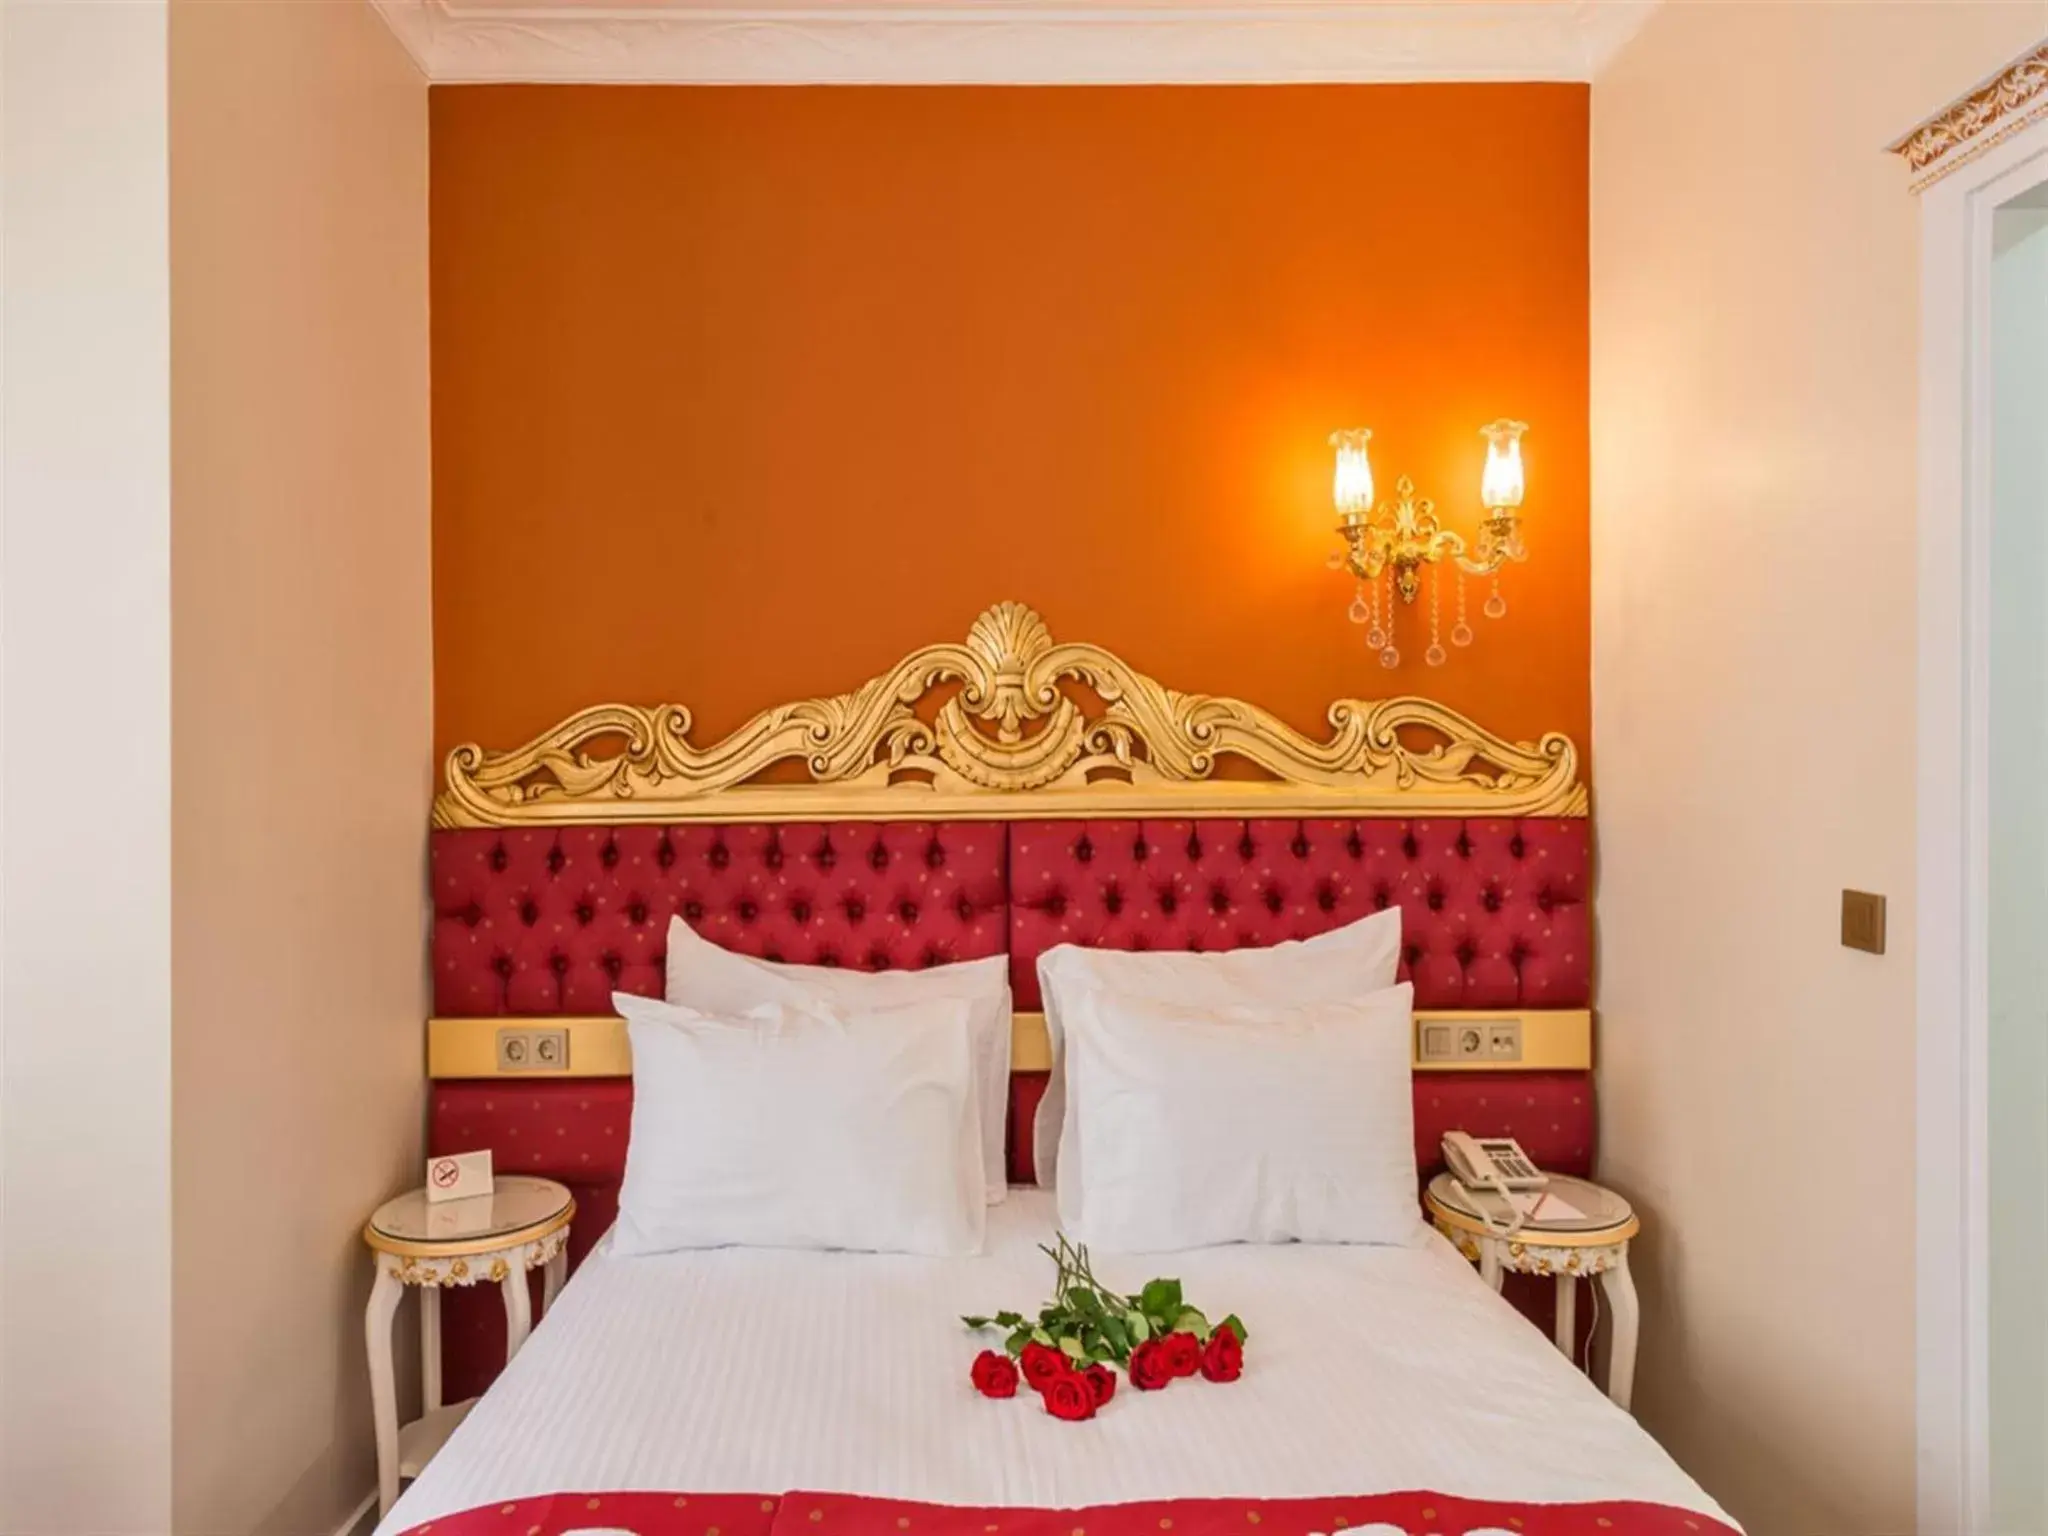 Decorative detail, Bed in Galatower Hotel